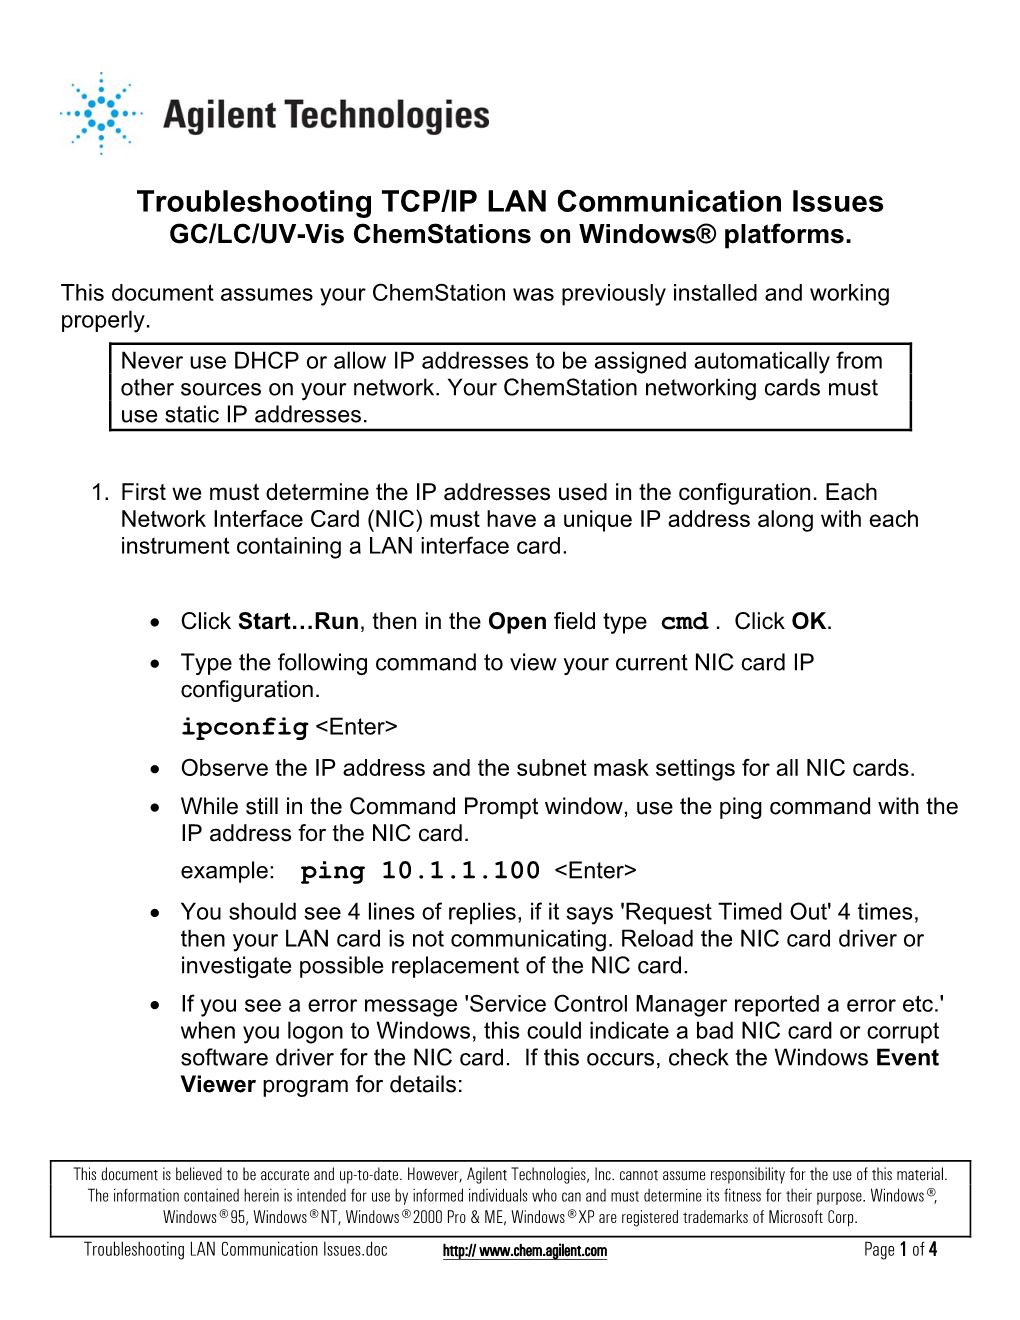 Troubleshooting TCP/IP LAN Communication Issues GC/LC/UV-Vis Chemstations on Windows® Platforms